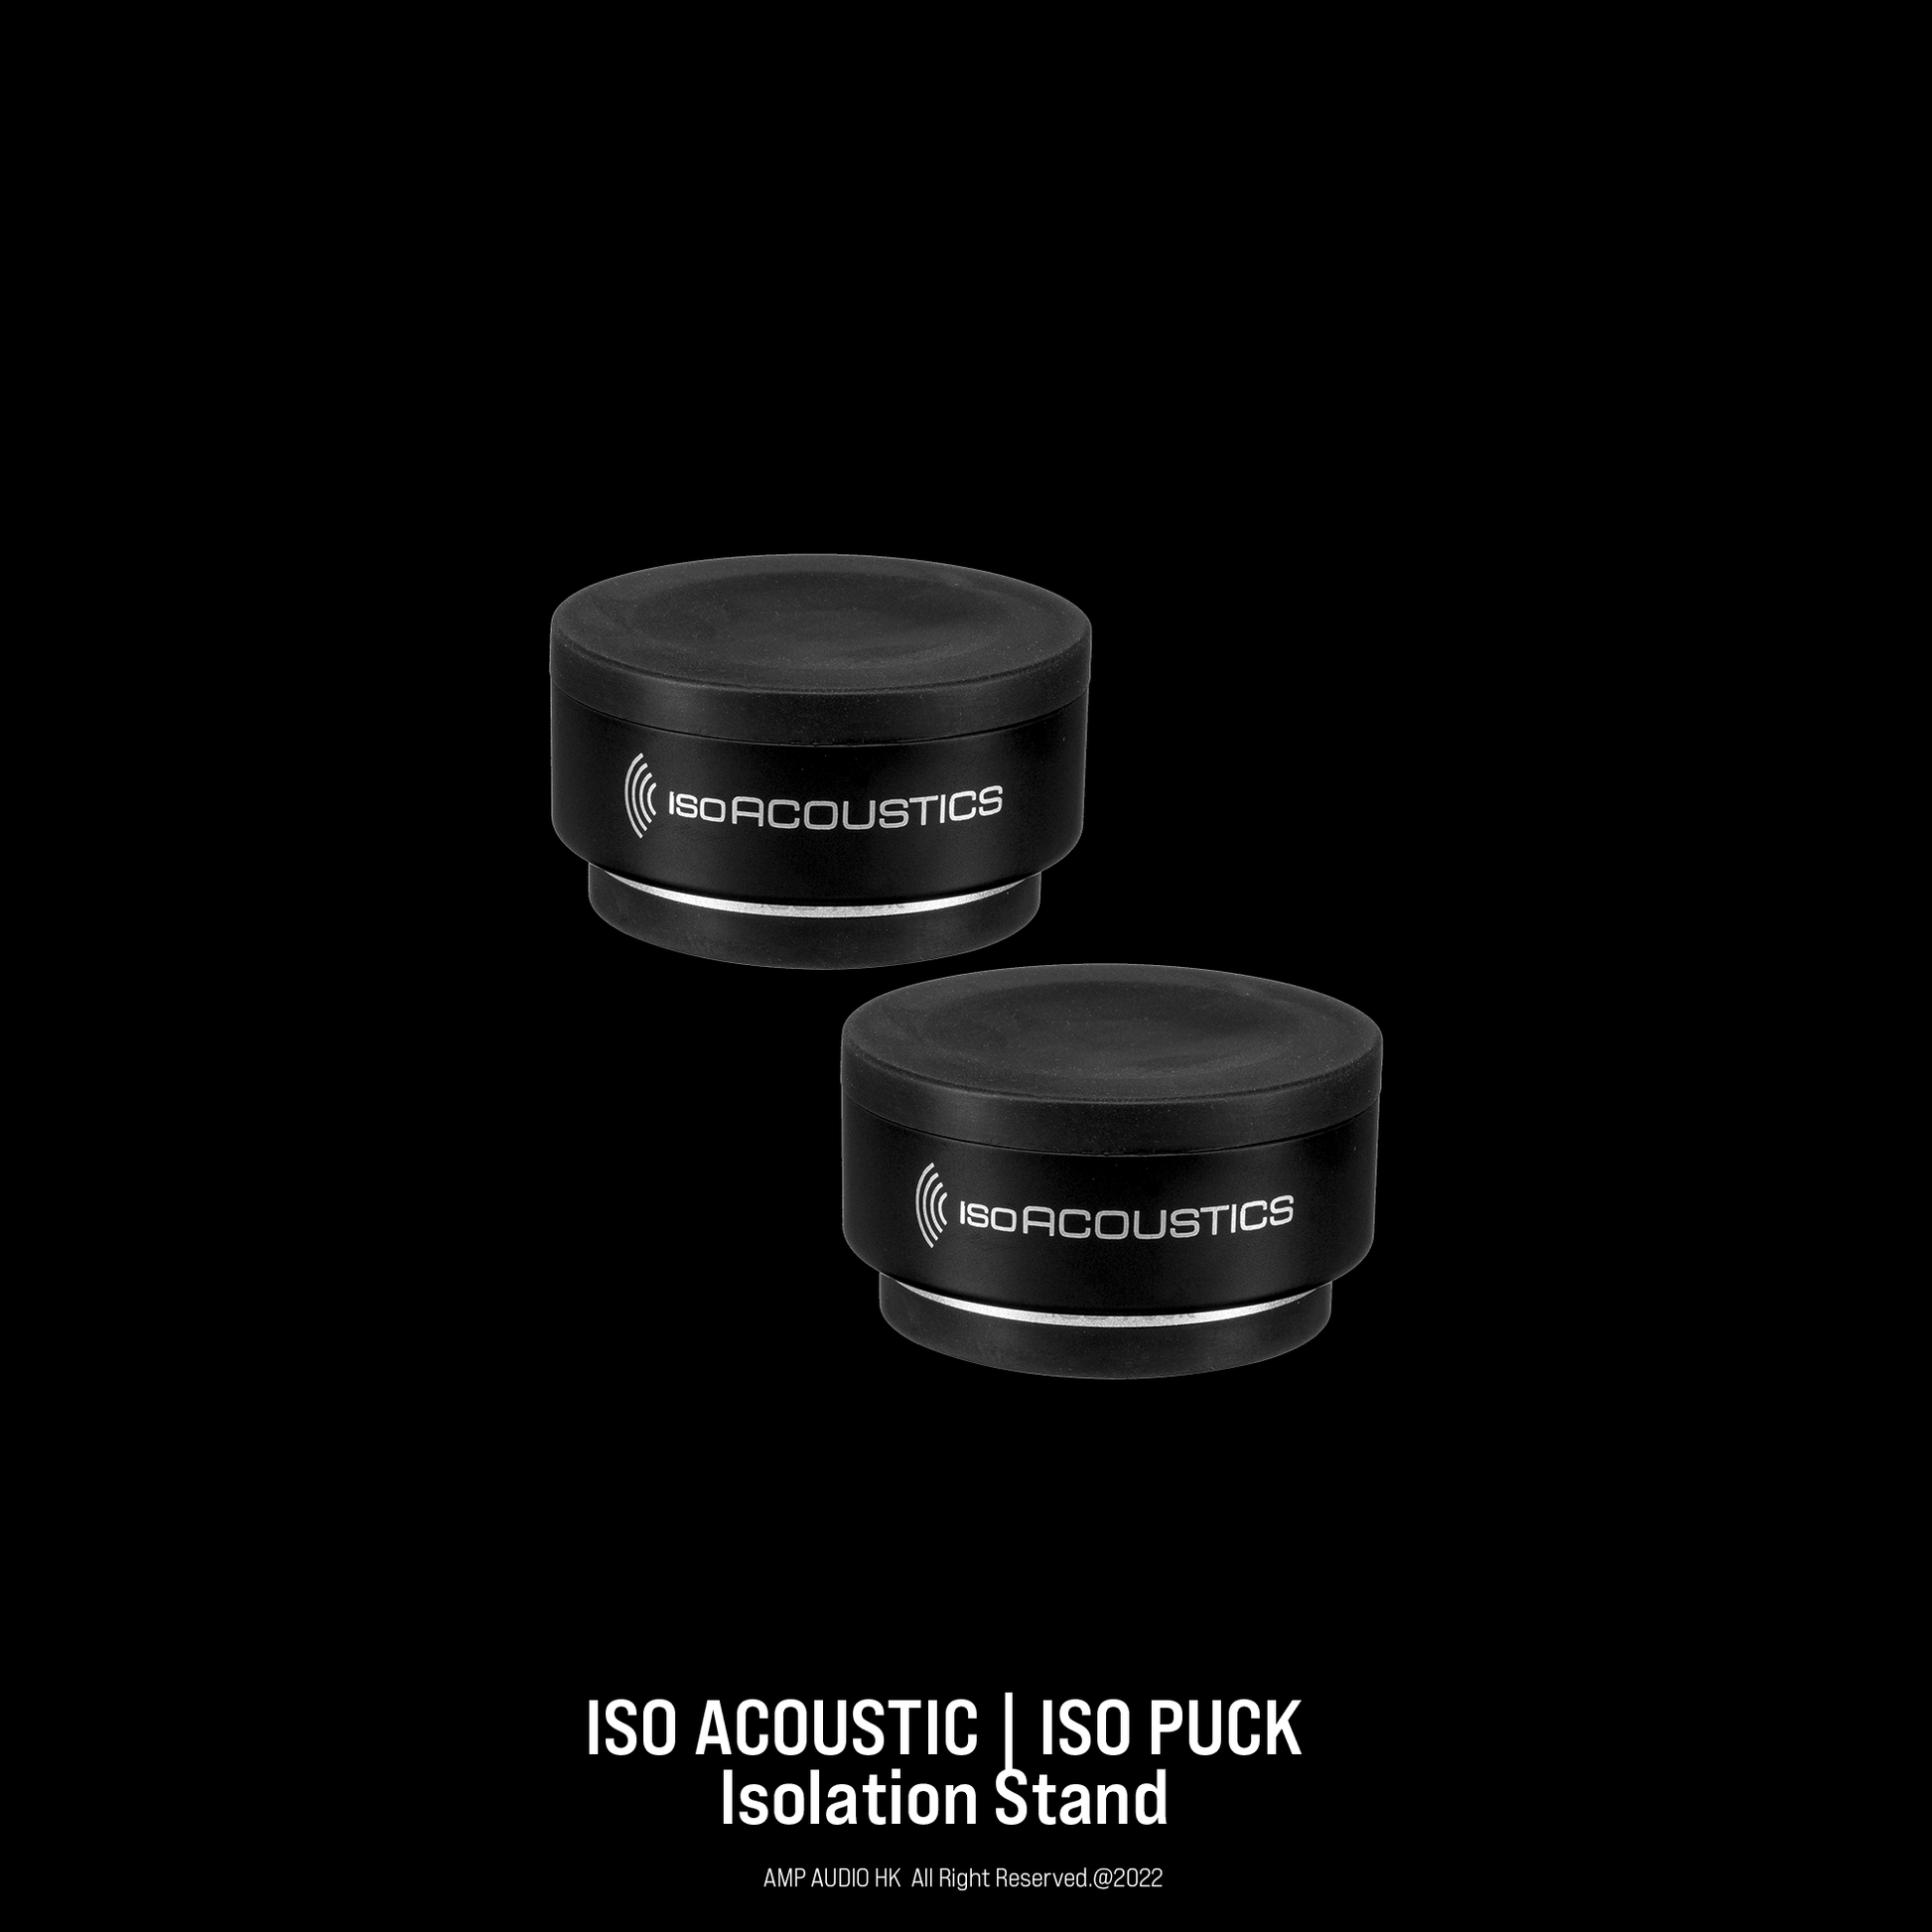 Iso Acoustic | ISO PUCK - AMP AUDIO